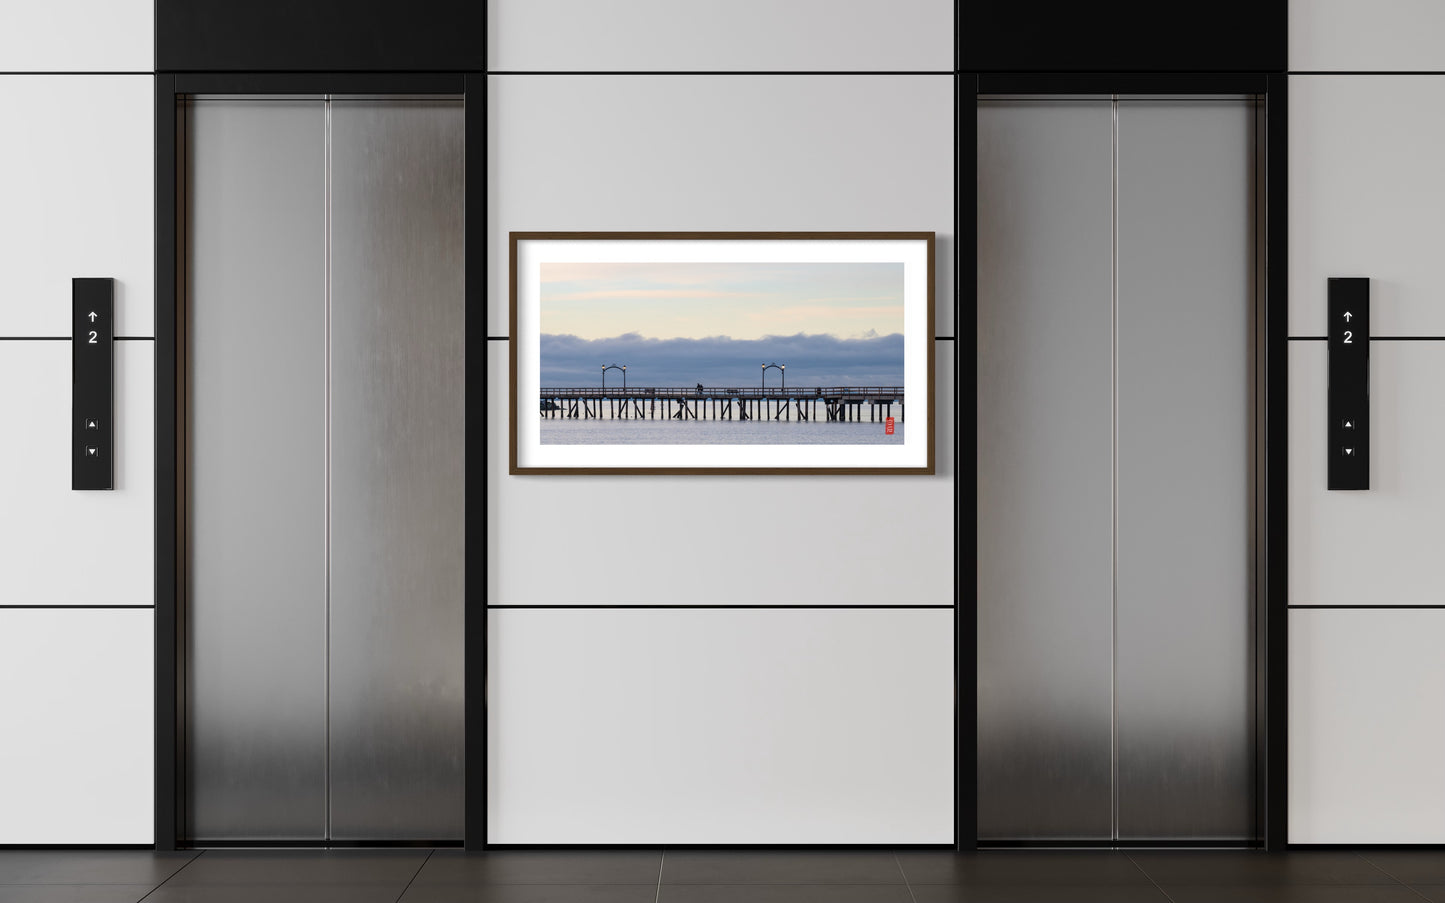 White Rock Pier: 20*40 photo with solid wood frame